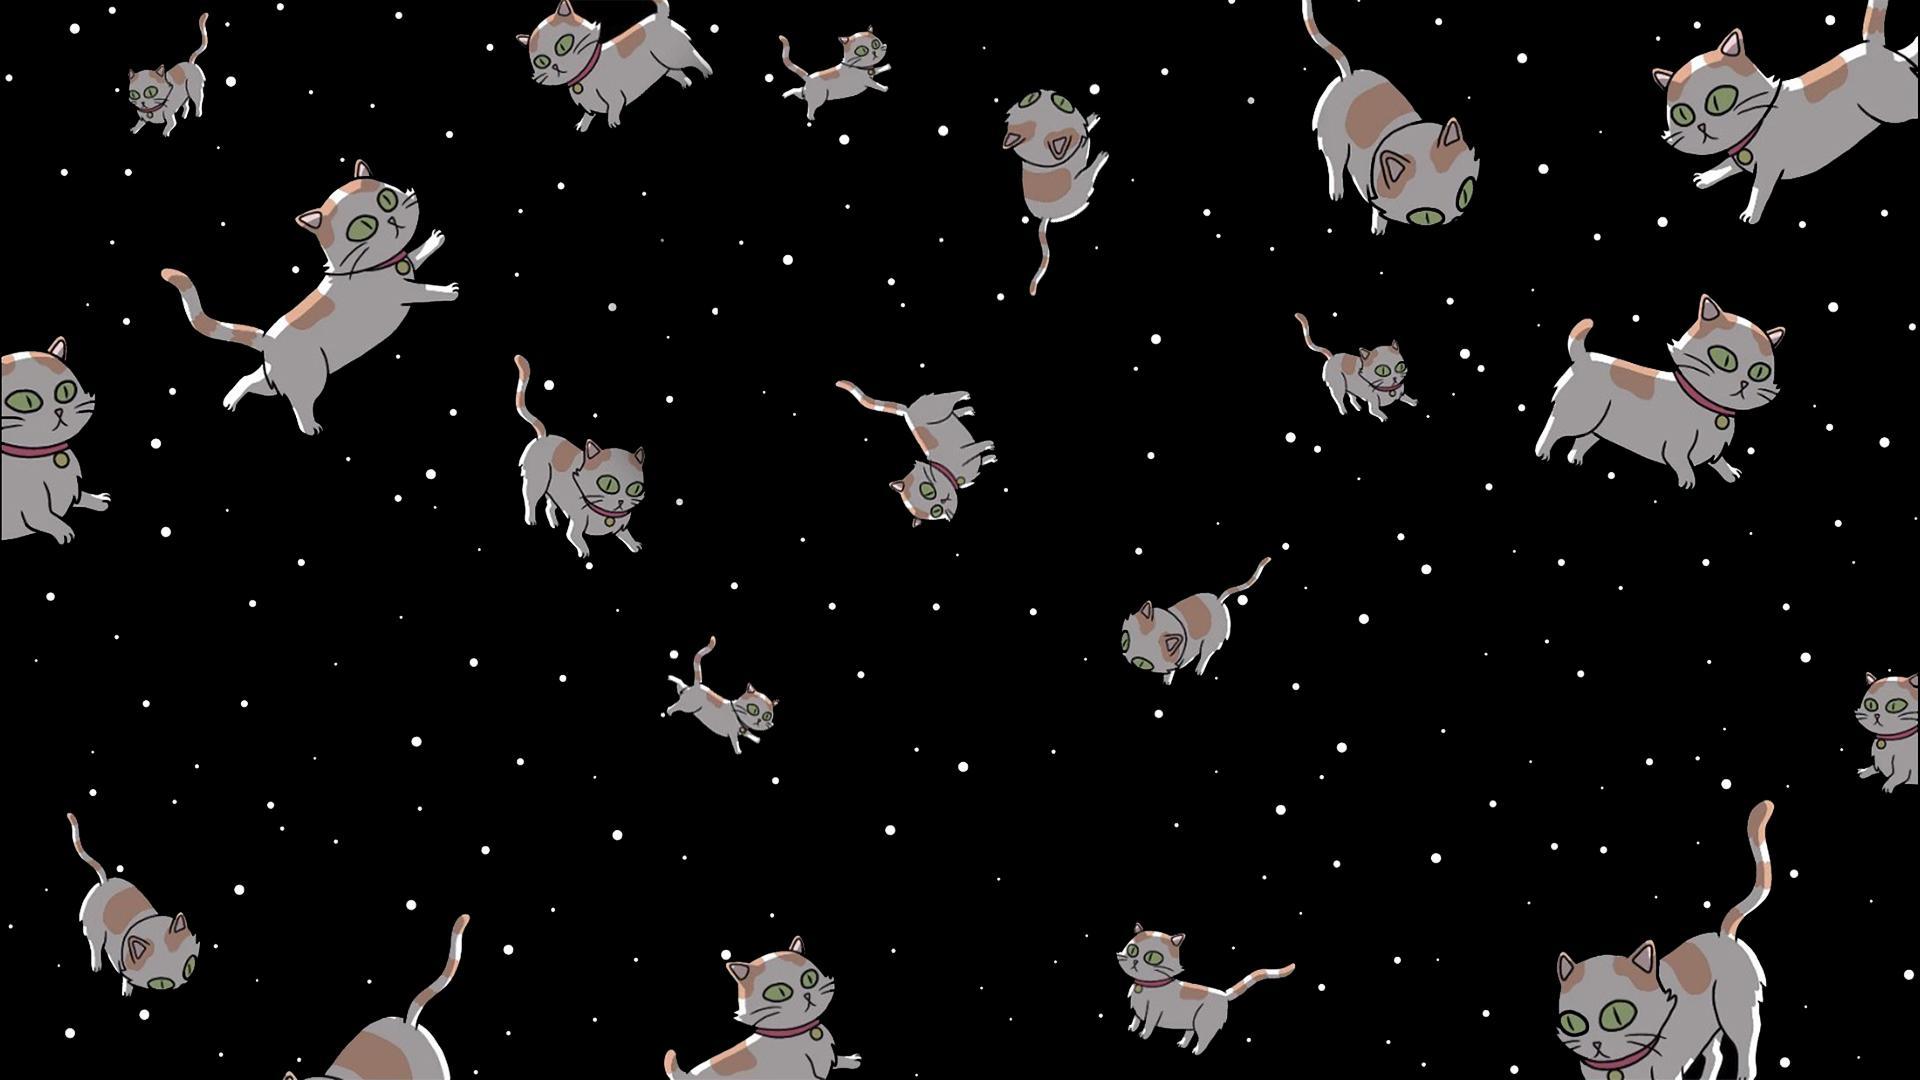 Noticed a disturbing lack of space cat wallpaper around so I made